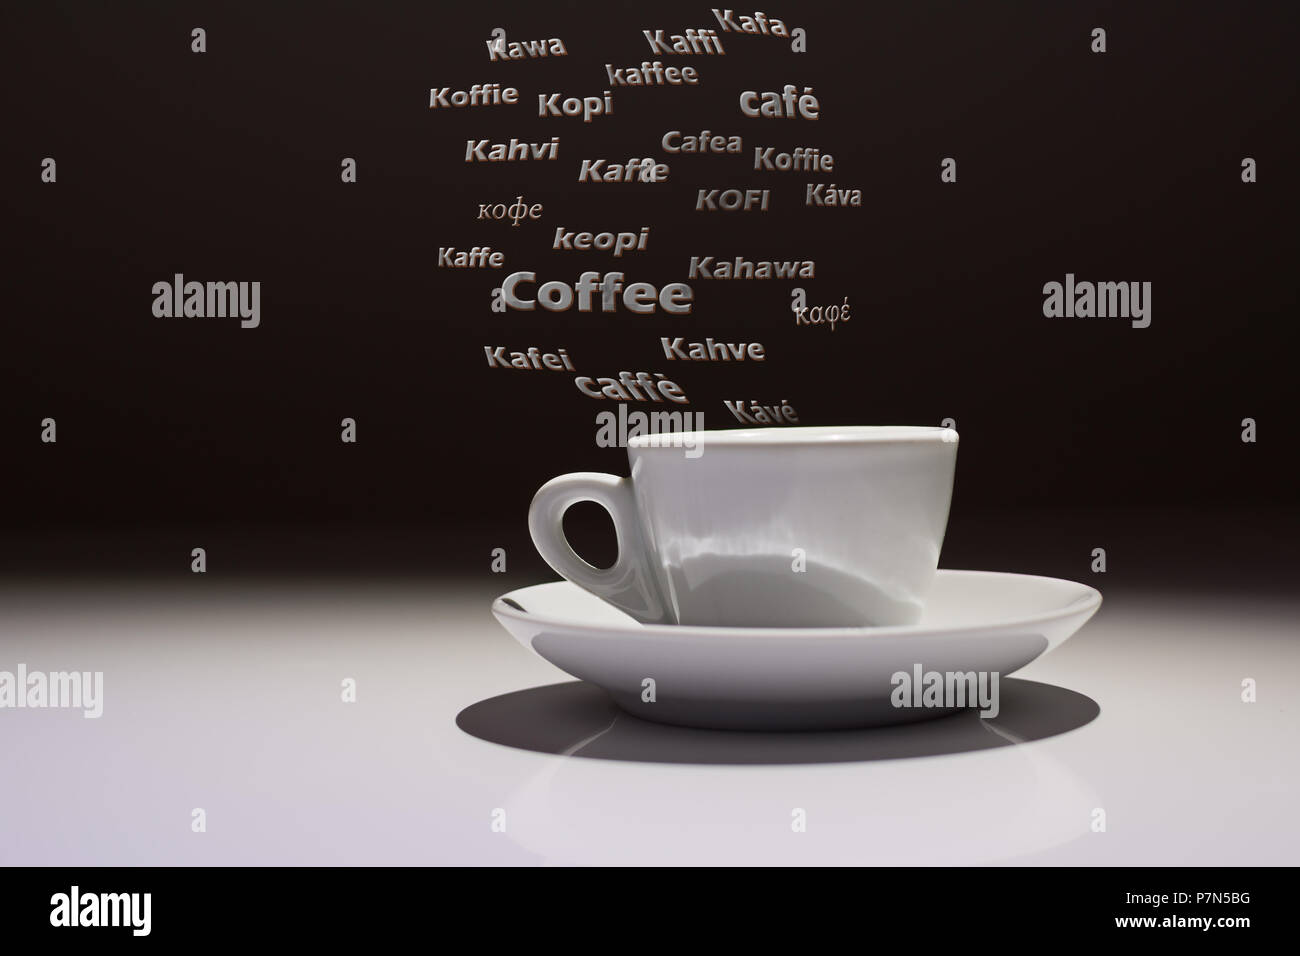 coffee cup with the word Caffè in many languages of the world Stock Photo